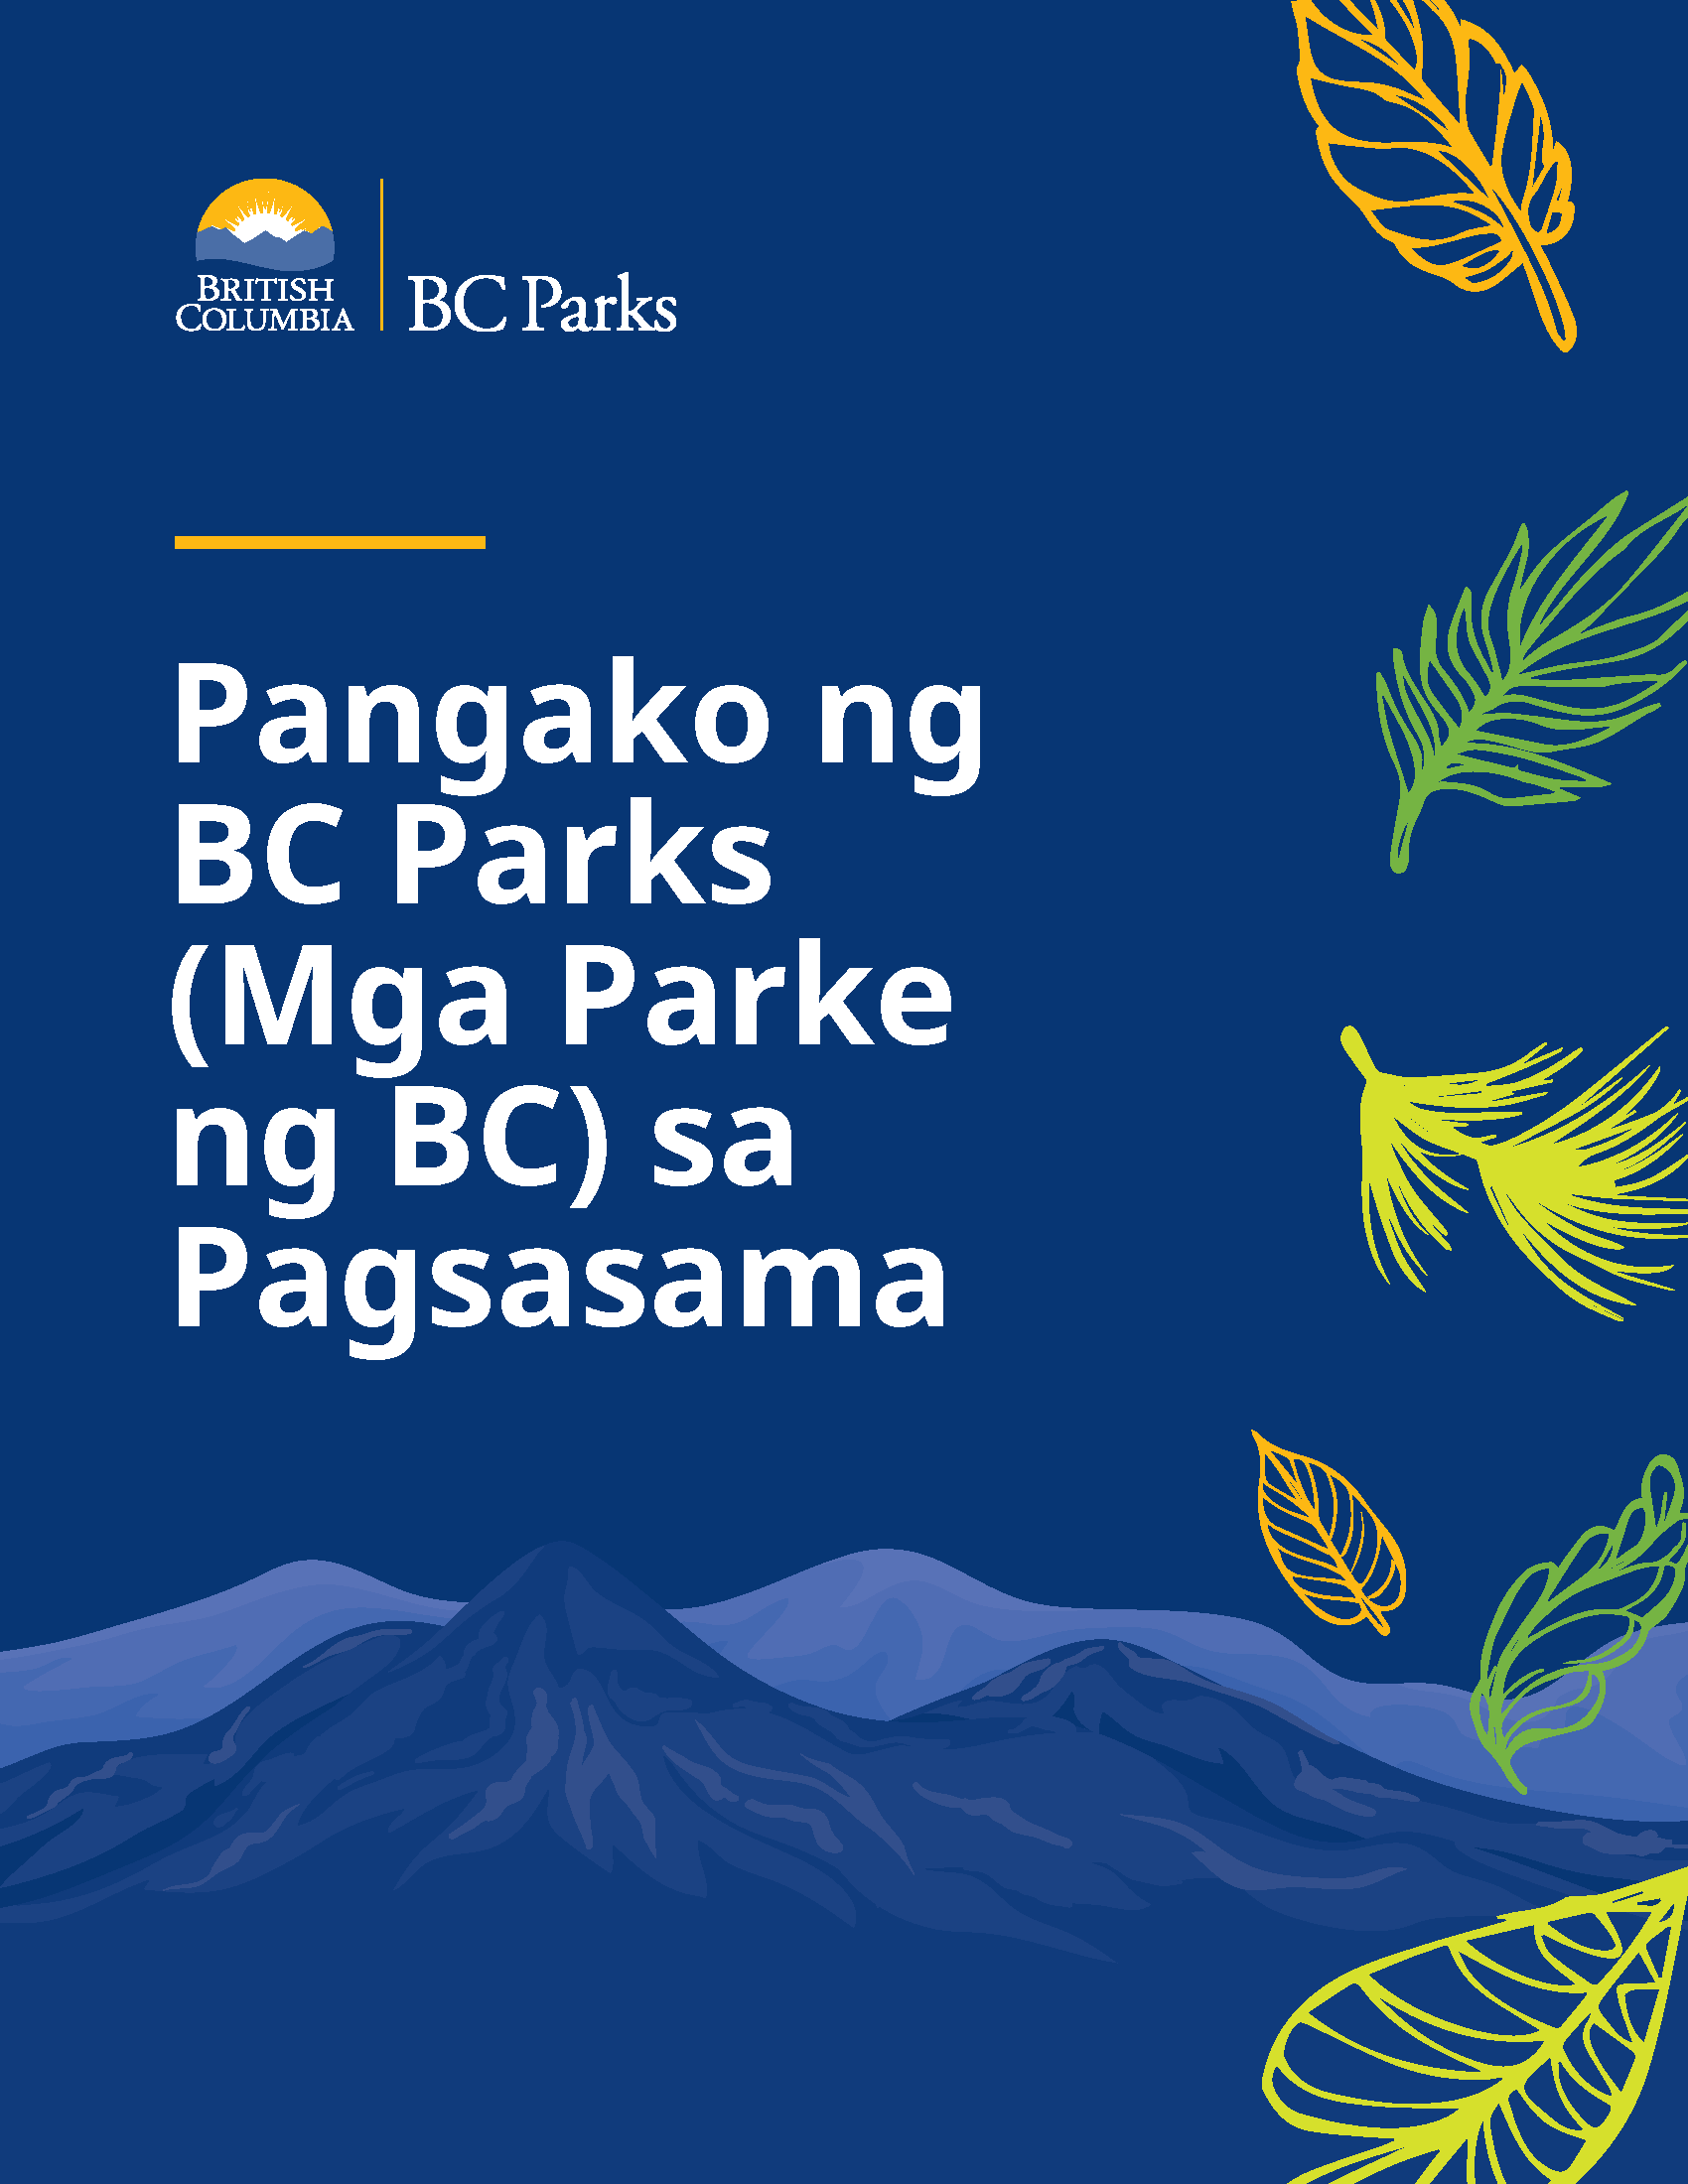 BC Parks Commitment to Inclusion in Tagalog